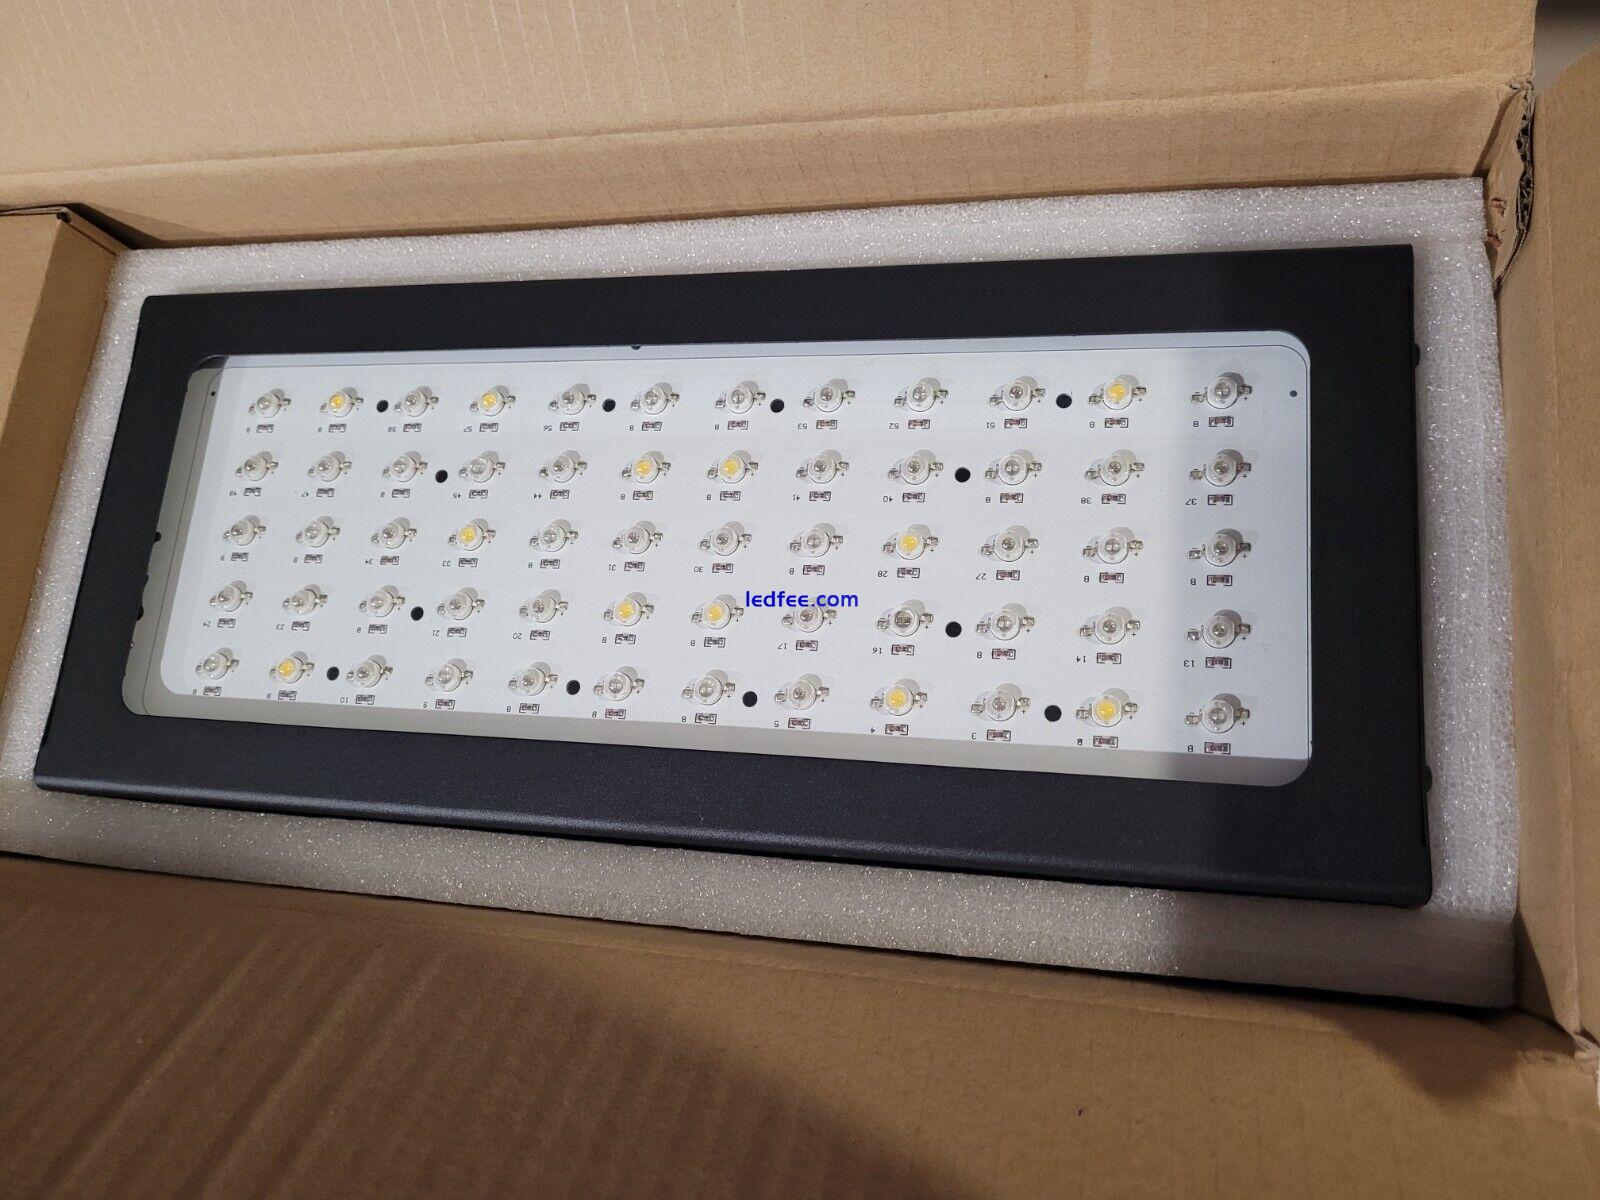 600w LED Grow Light for indoor grow tents and gardens 0 